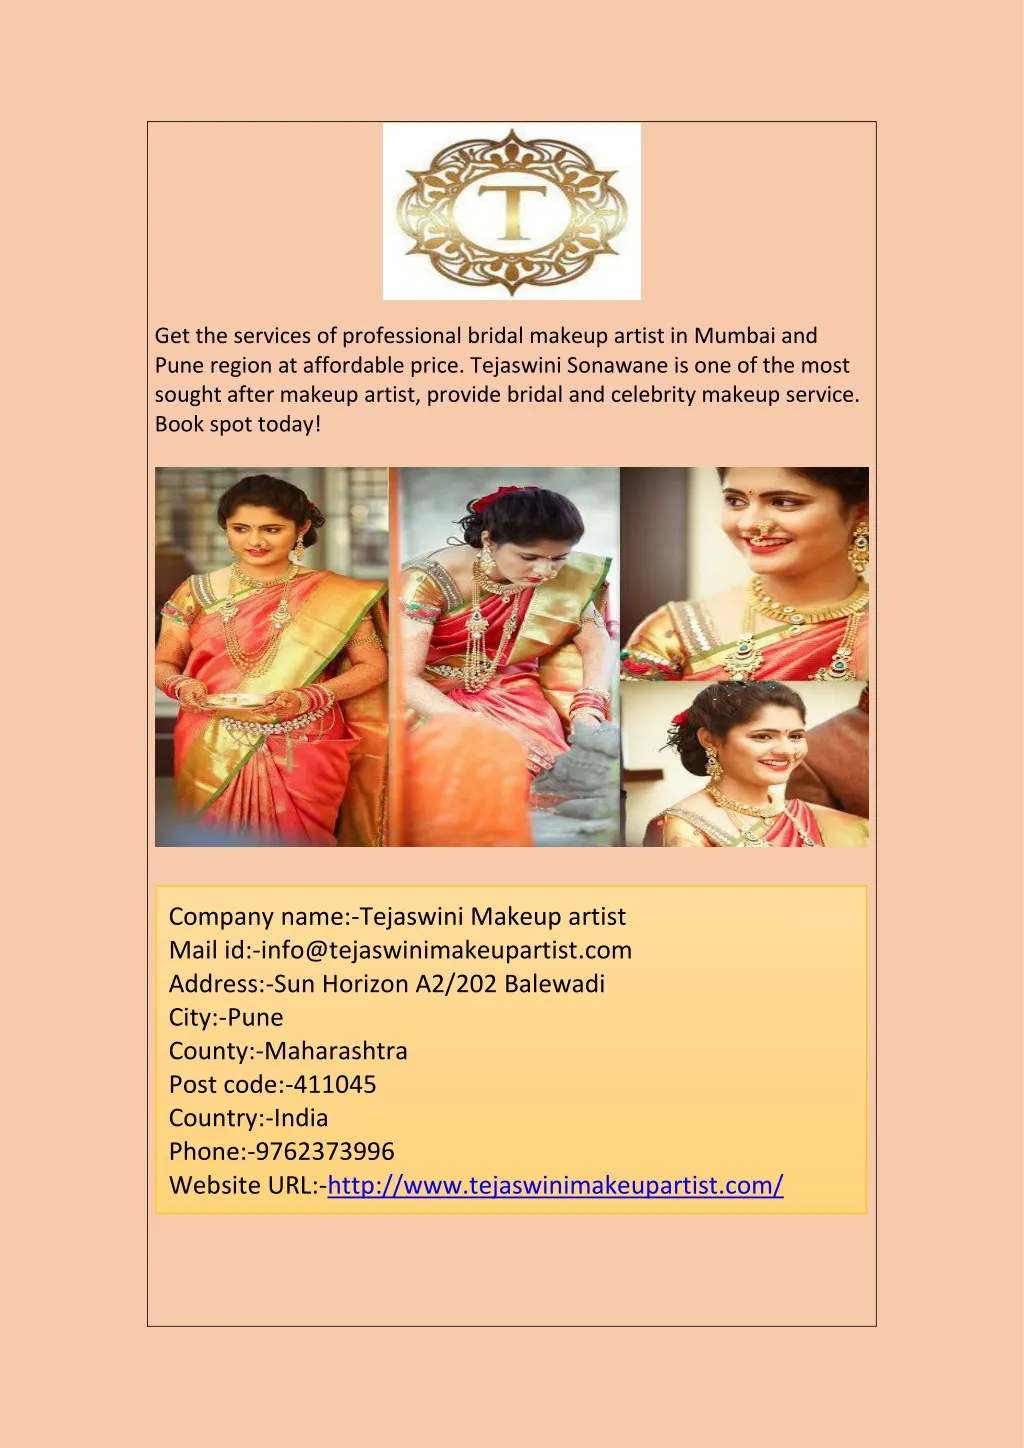 get the services of professional bridal makeup